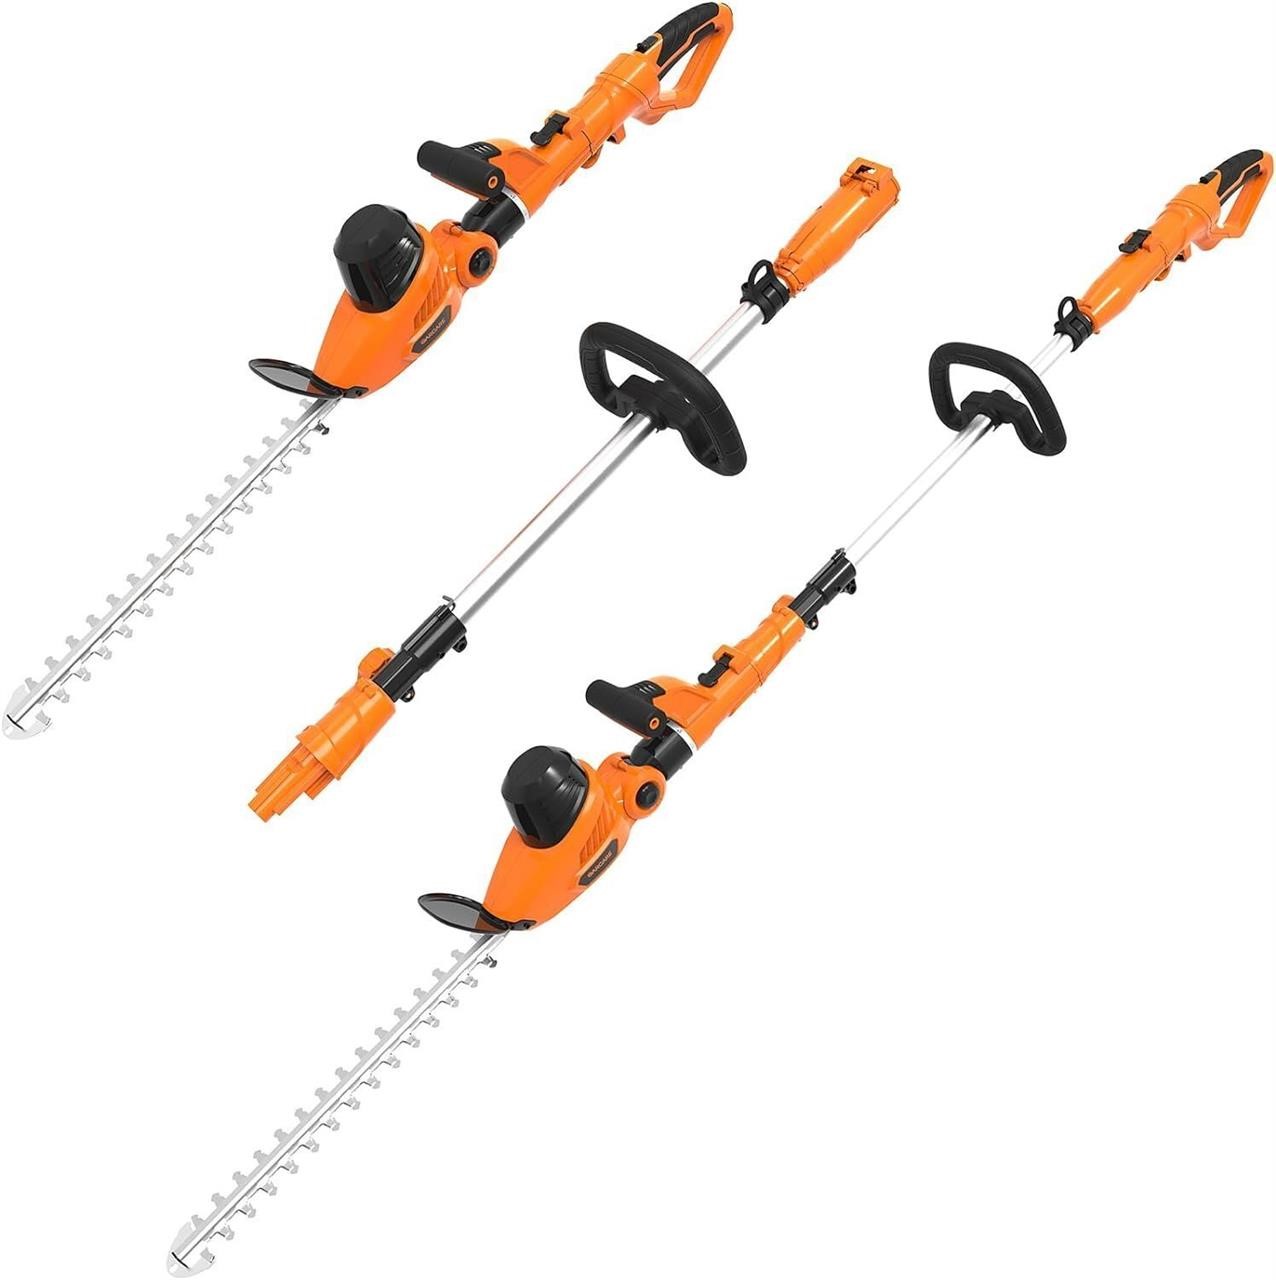 ($149) GARCARE 2 in 1 Hedge Trimmer Corded Pole